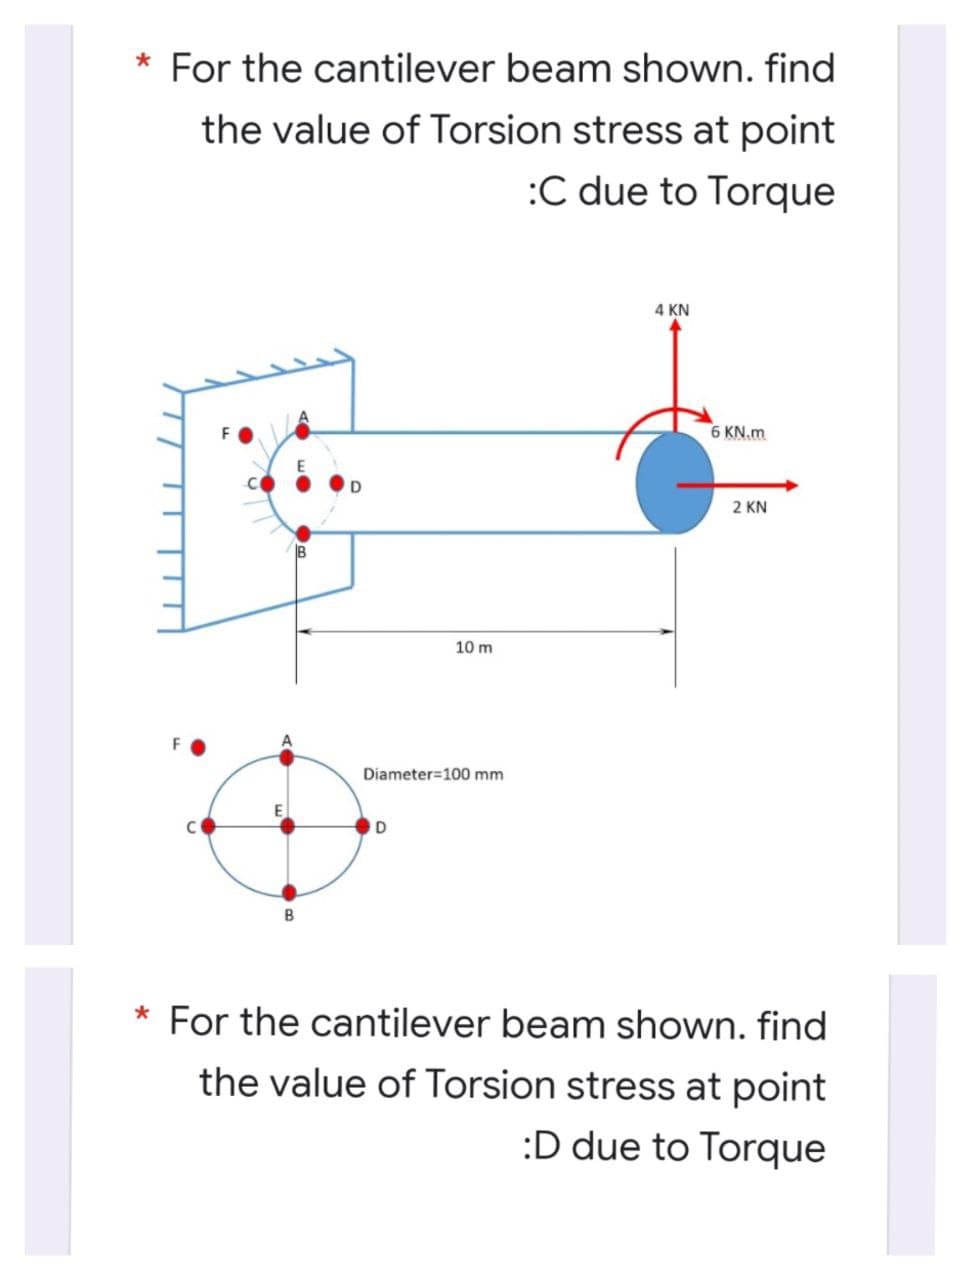 * For the cantilever beam shown. find
the value of Torsion stress at point
:C due to Torque
4 KN
6 KN.m
2 KN
10 m
Diameter=100 mm
* For the cantilever beam shown. find
the value of Torsion stress at point
:D due to Torque
